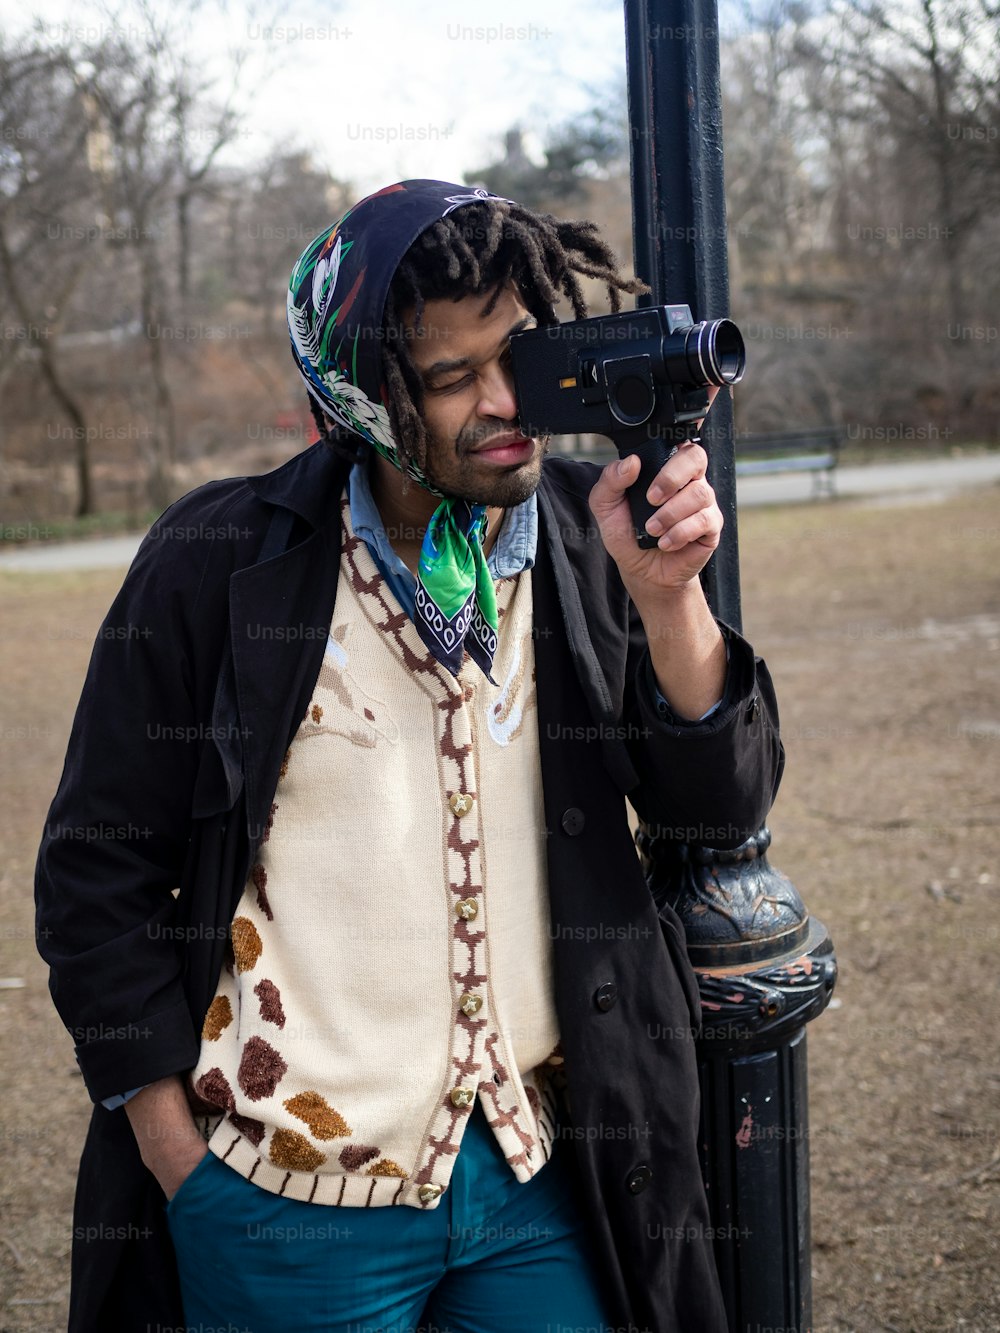 a man with dreadlocks is holding a camera